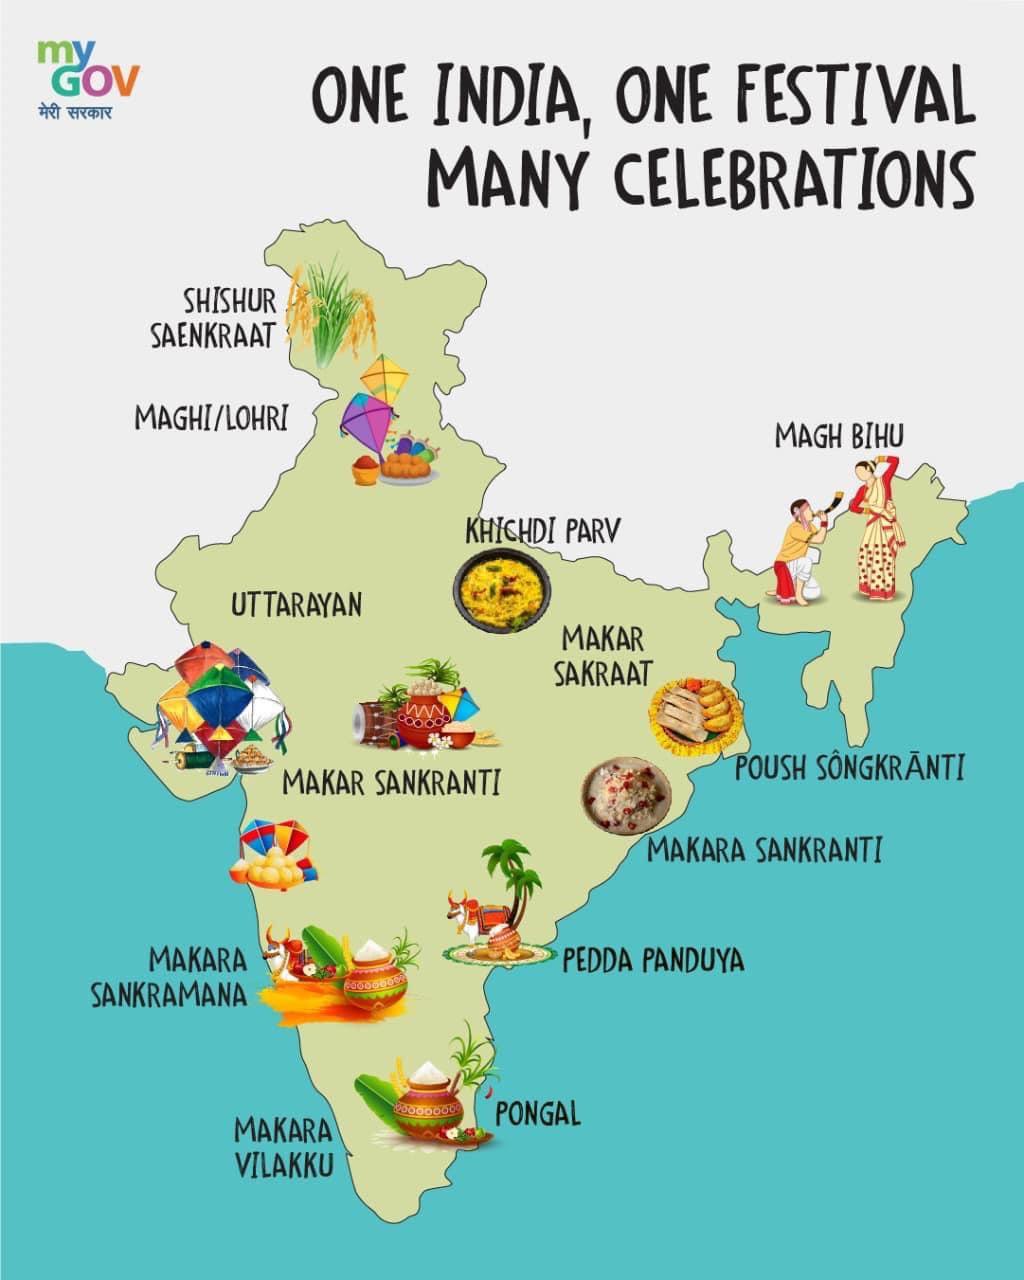 Bhubaneswar, 14/01/2022: One India,One festival and many celebrations. From  Maghi to Pongal, the variety of festivals ce